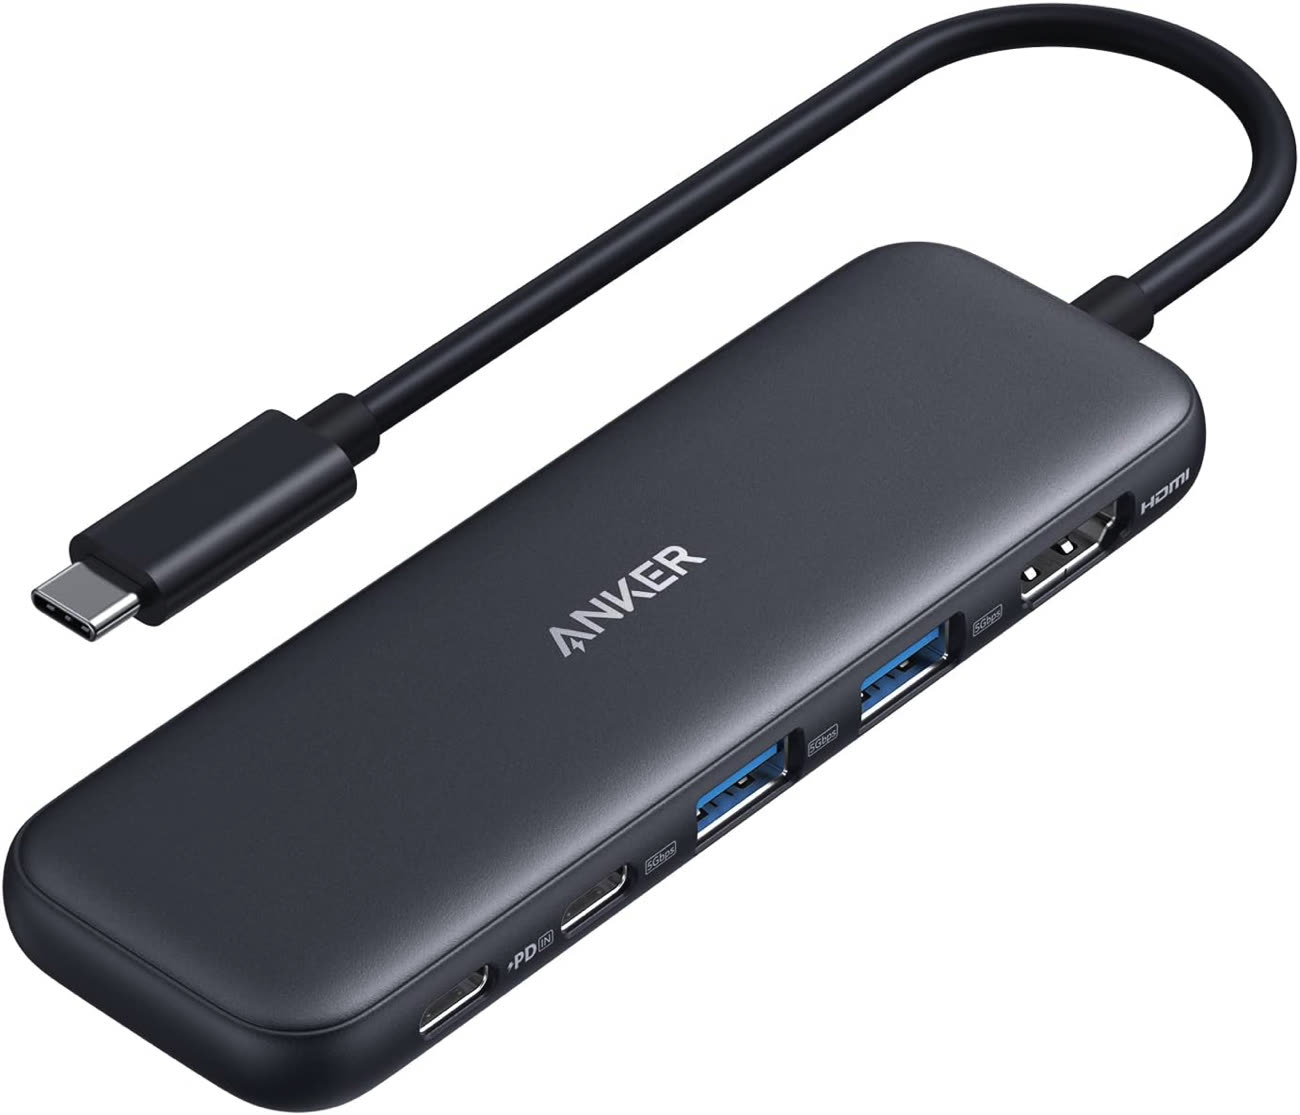 Anker Chargeur USB C 47 W, chargeur 523 (Nano 3), chargeur rapide